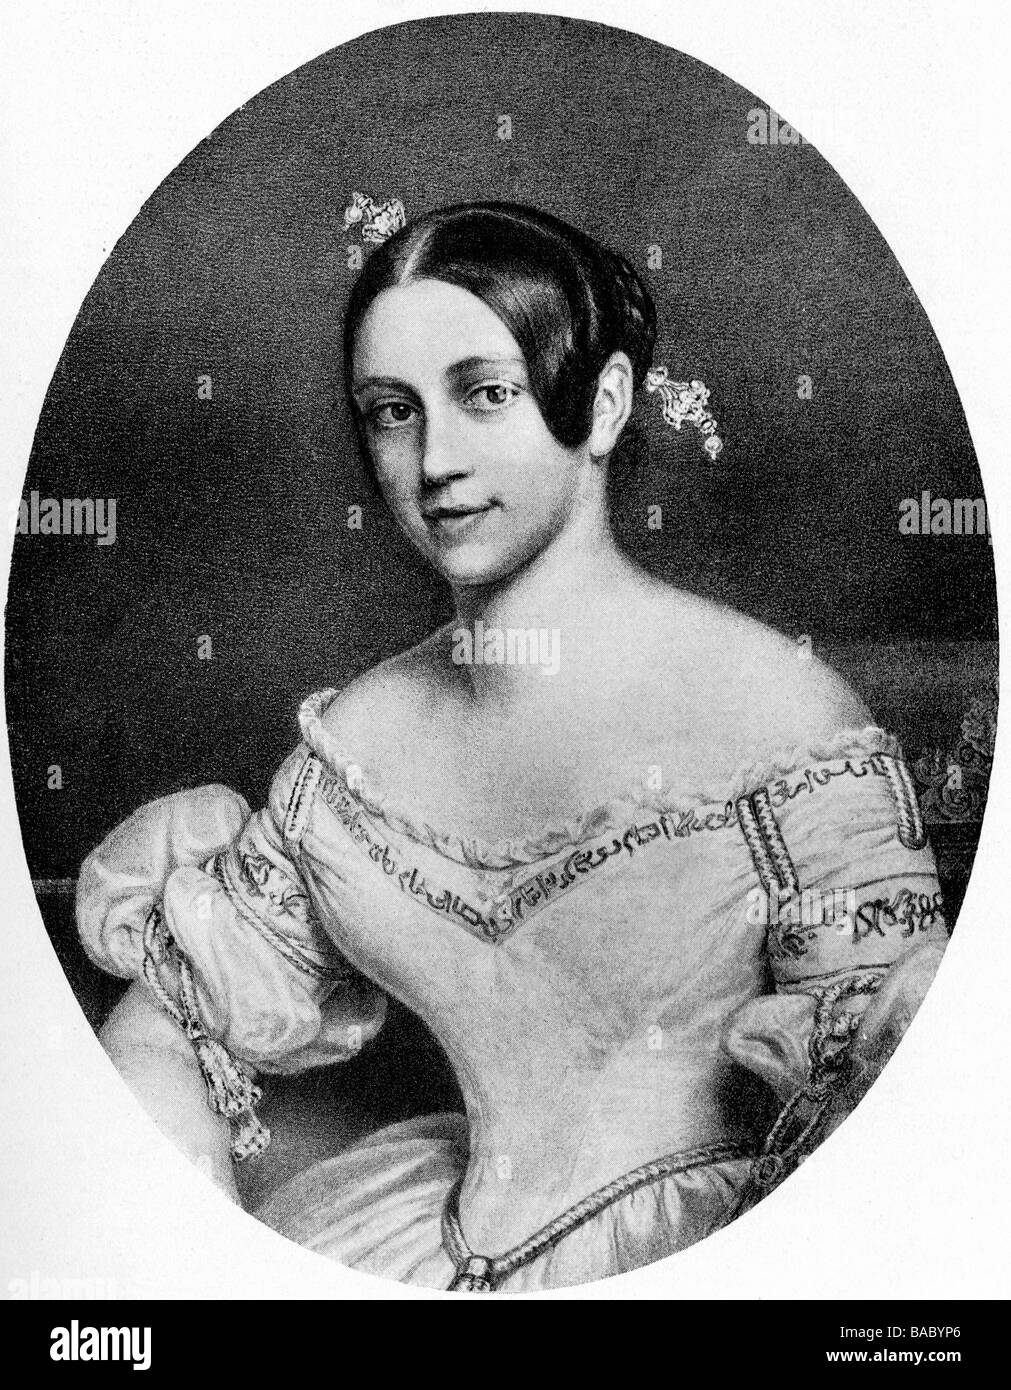 Thurn und Taxis, Mathilde Sophie Princess of, 9.2.1816 - 2.1.1886, half length, after contemporary lithograph, 19th century, Stock Photo